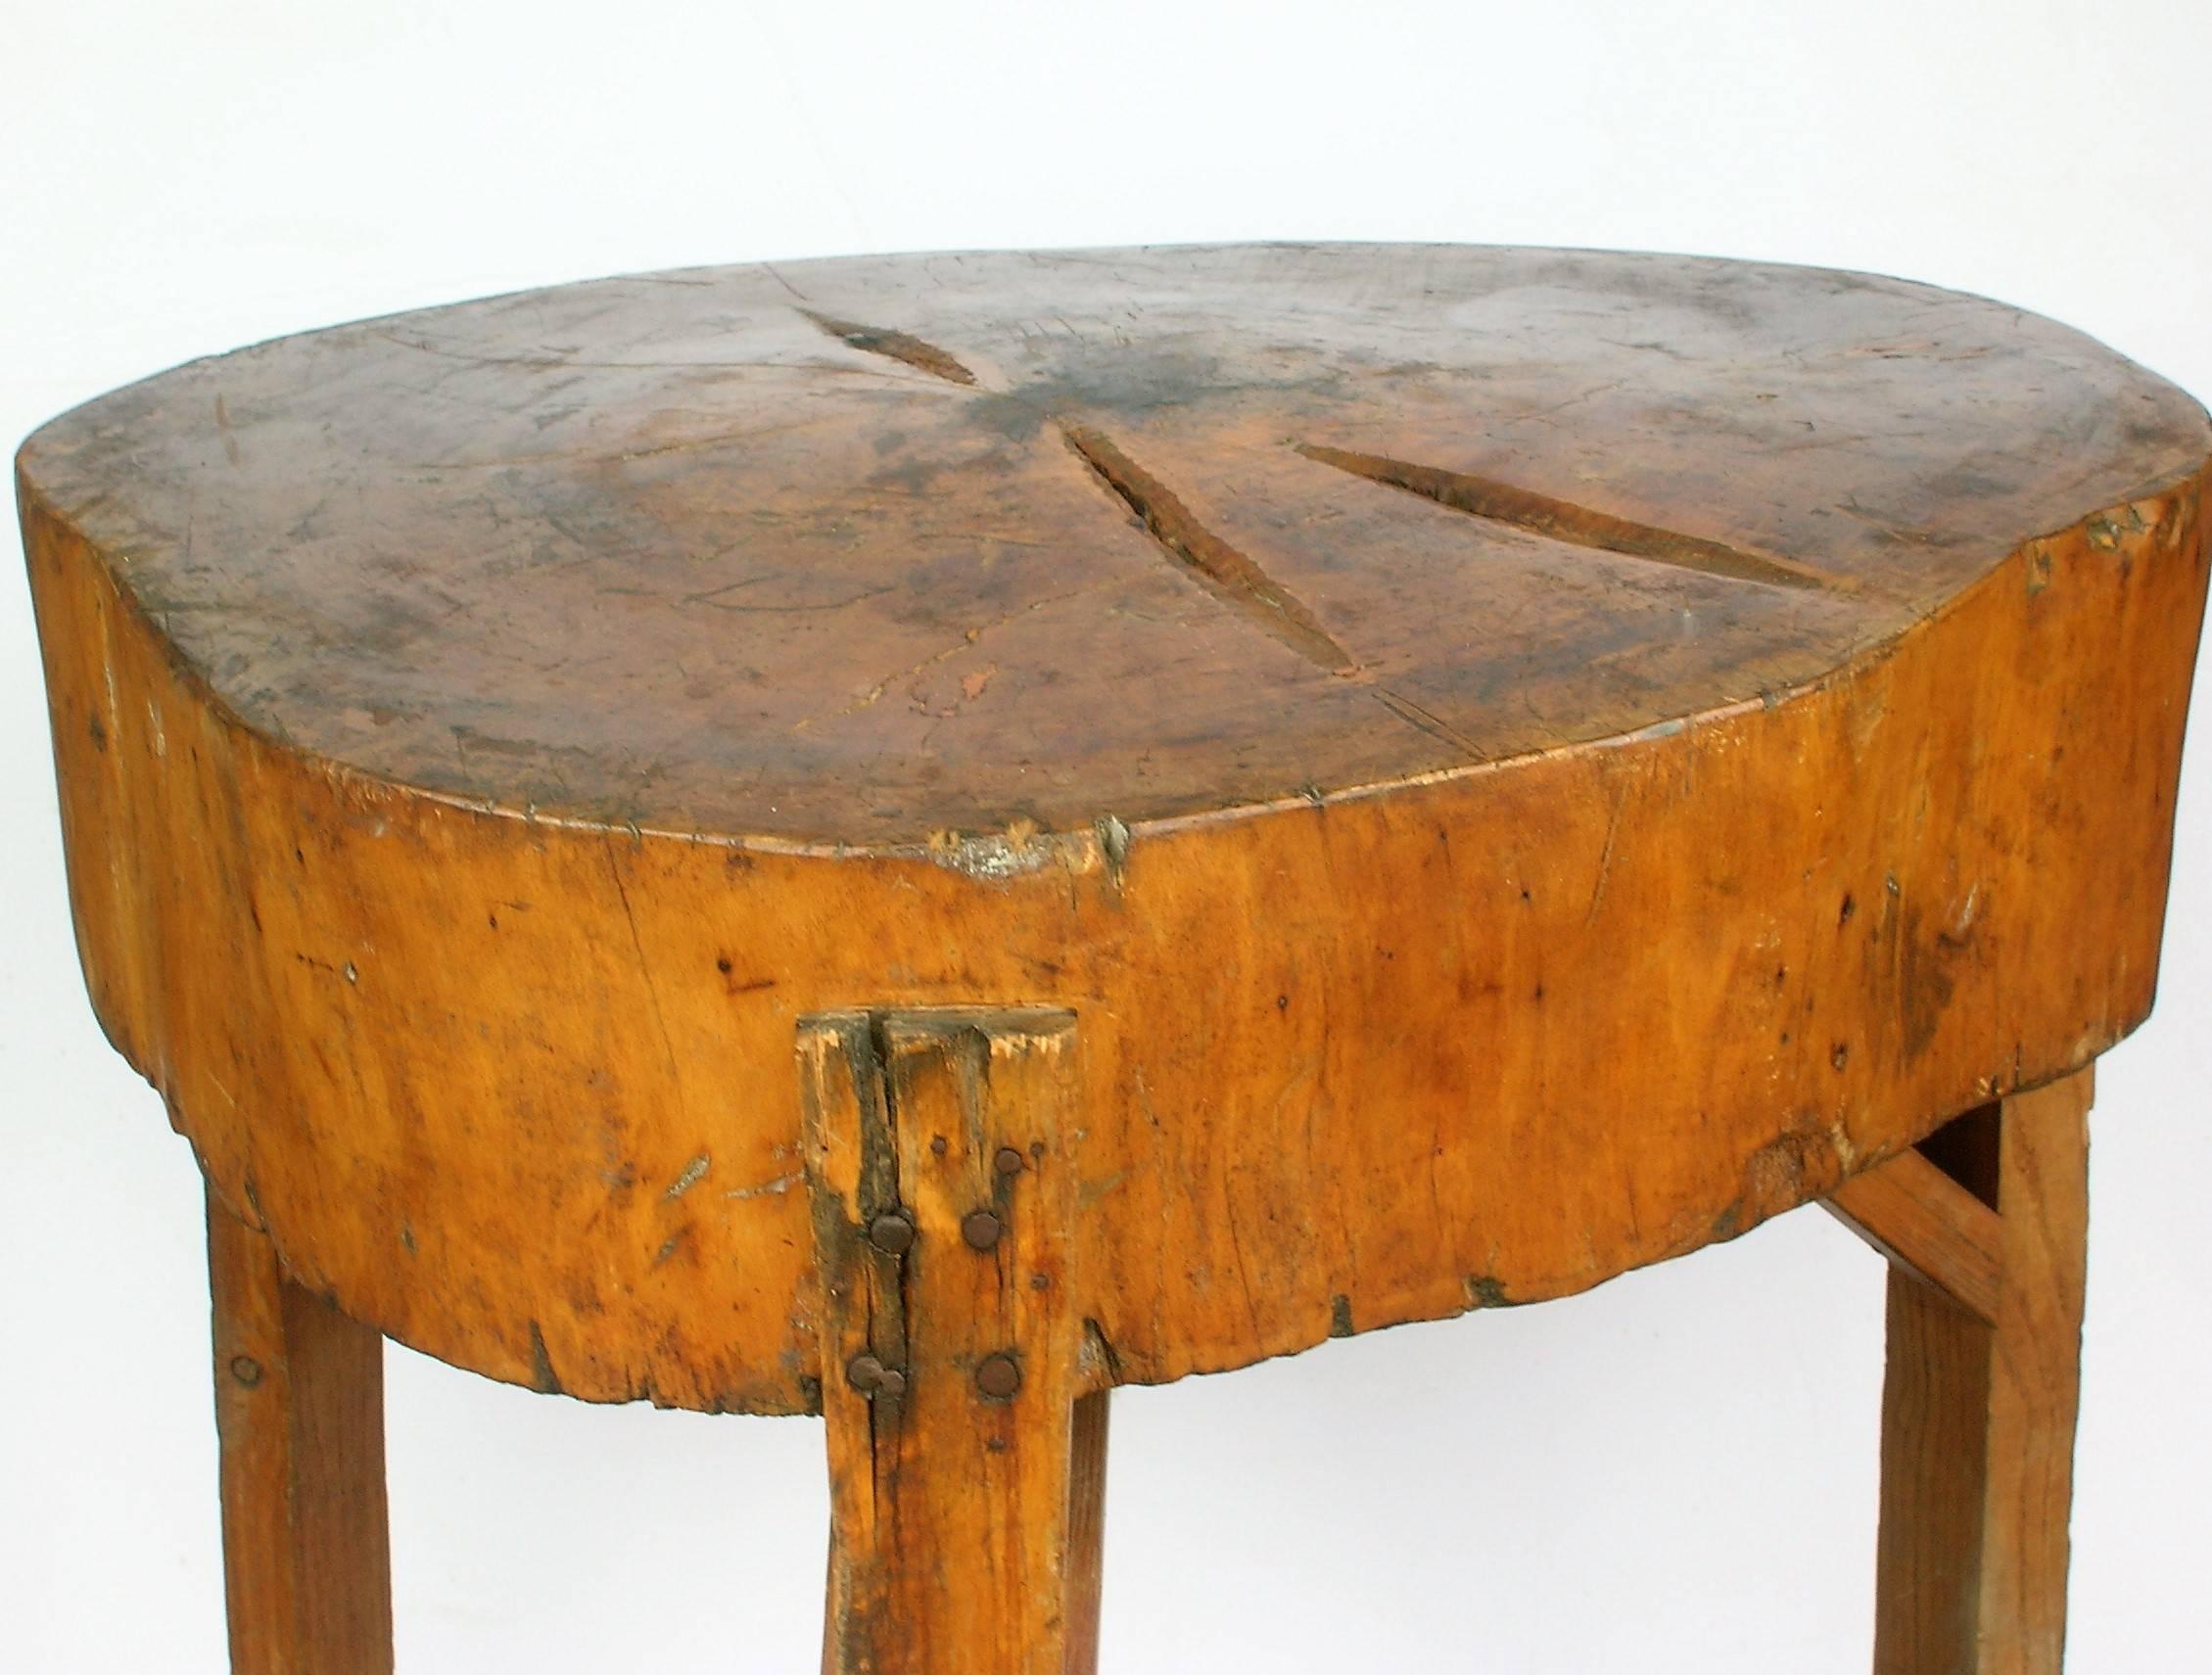 Antique American primitive three-legged butcher block table with perfectly aged rich glowing color patina and an asymmetrically shaped natural organic sculptural form. Beautiful table.